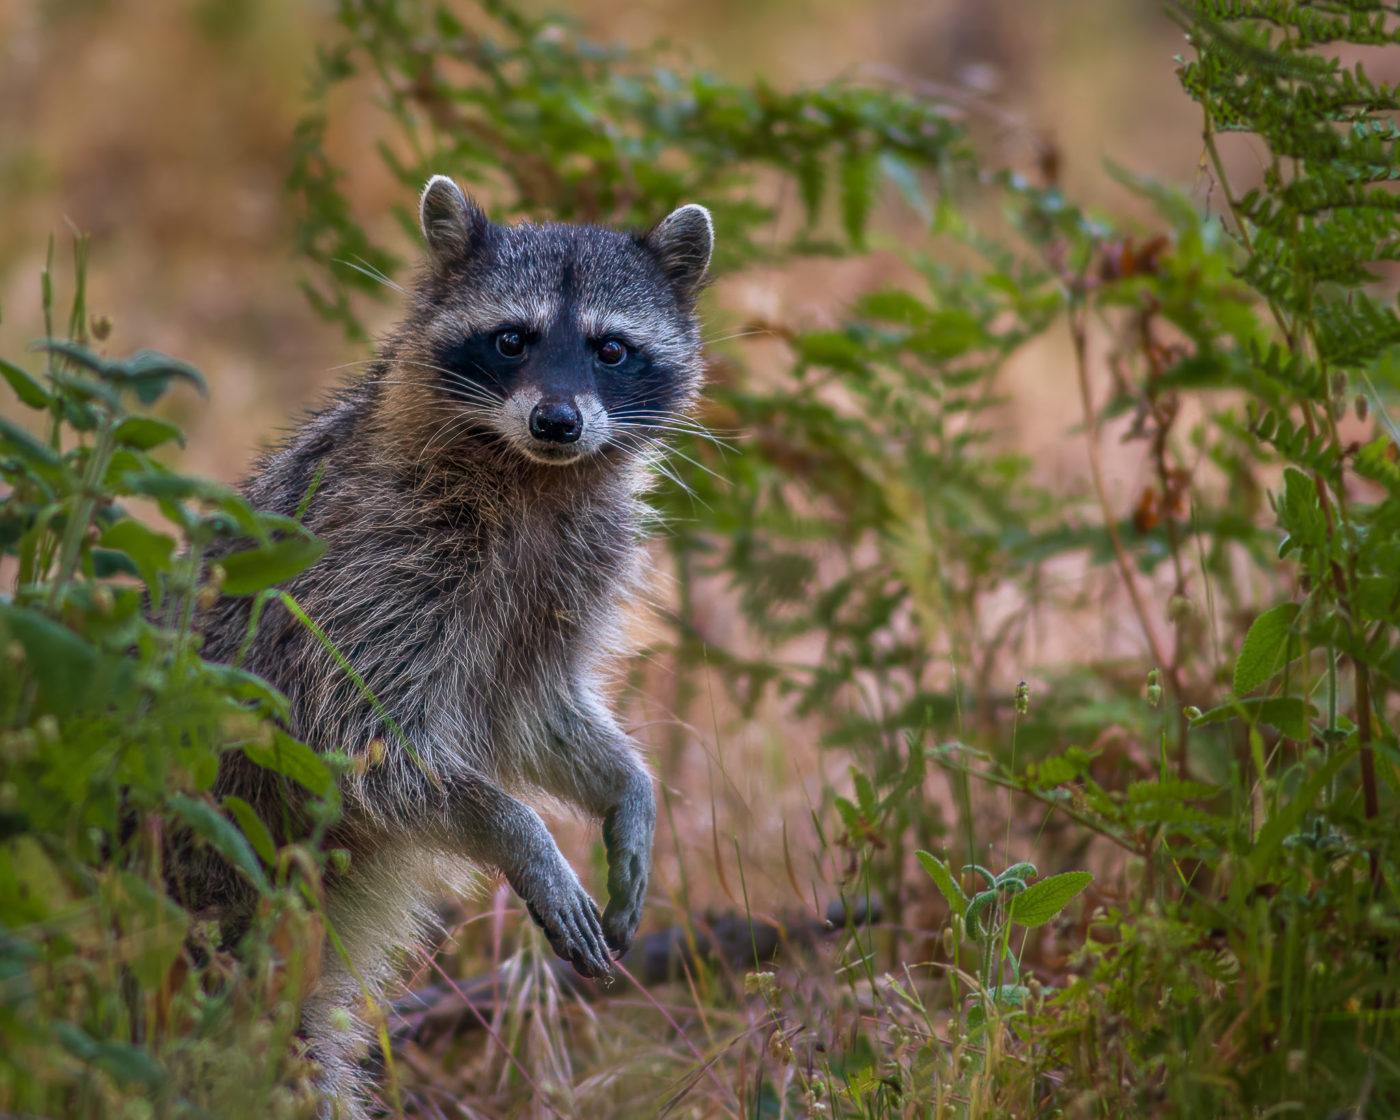 a raccoon standing and looking at the photographer